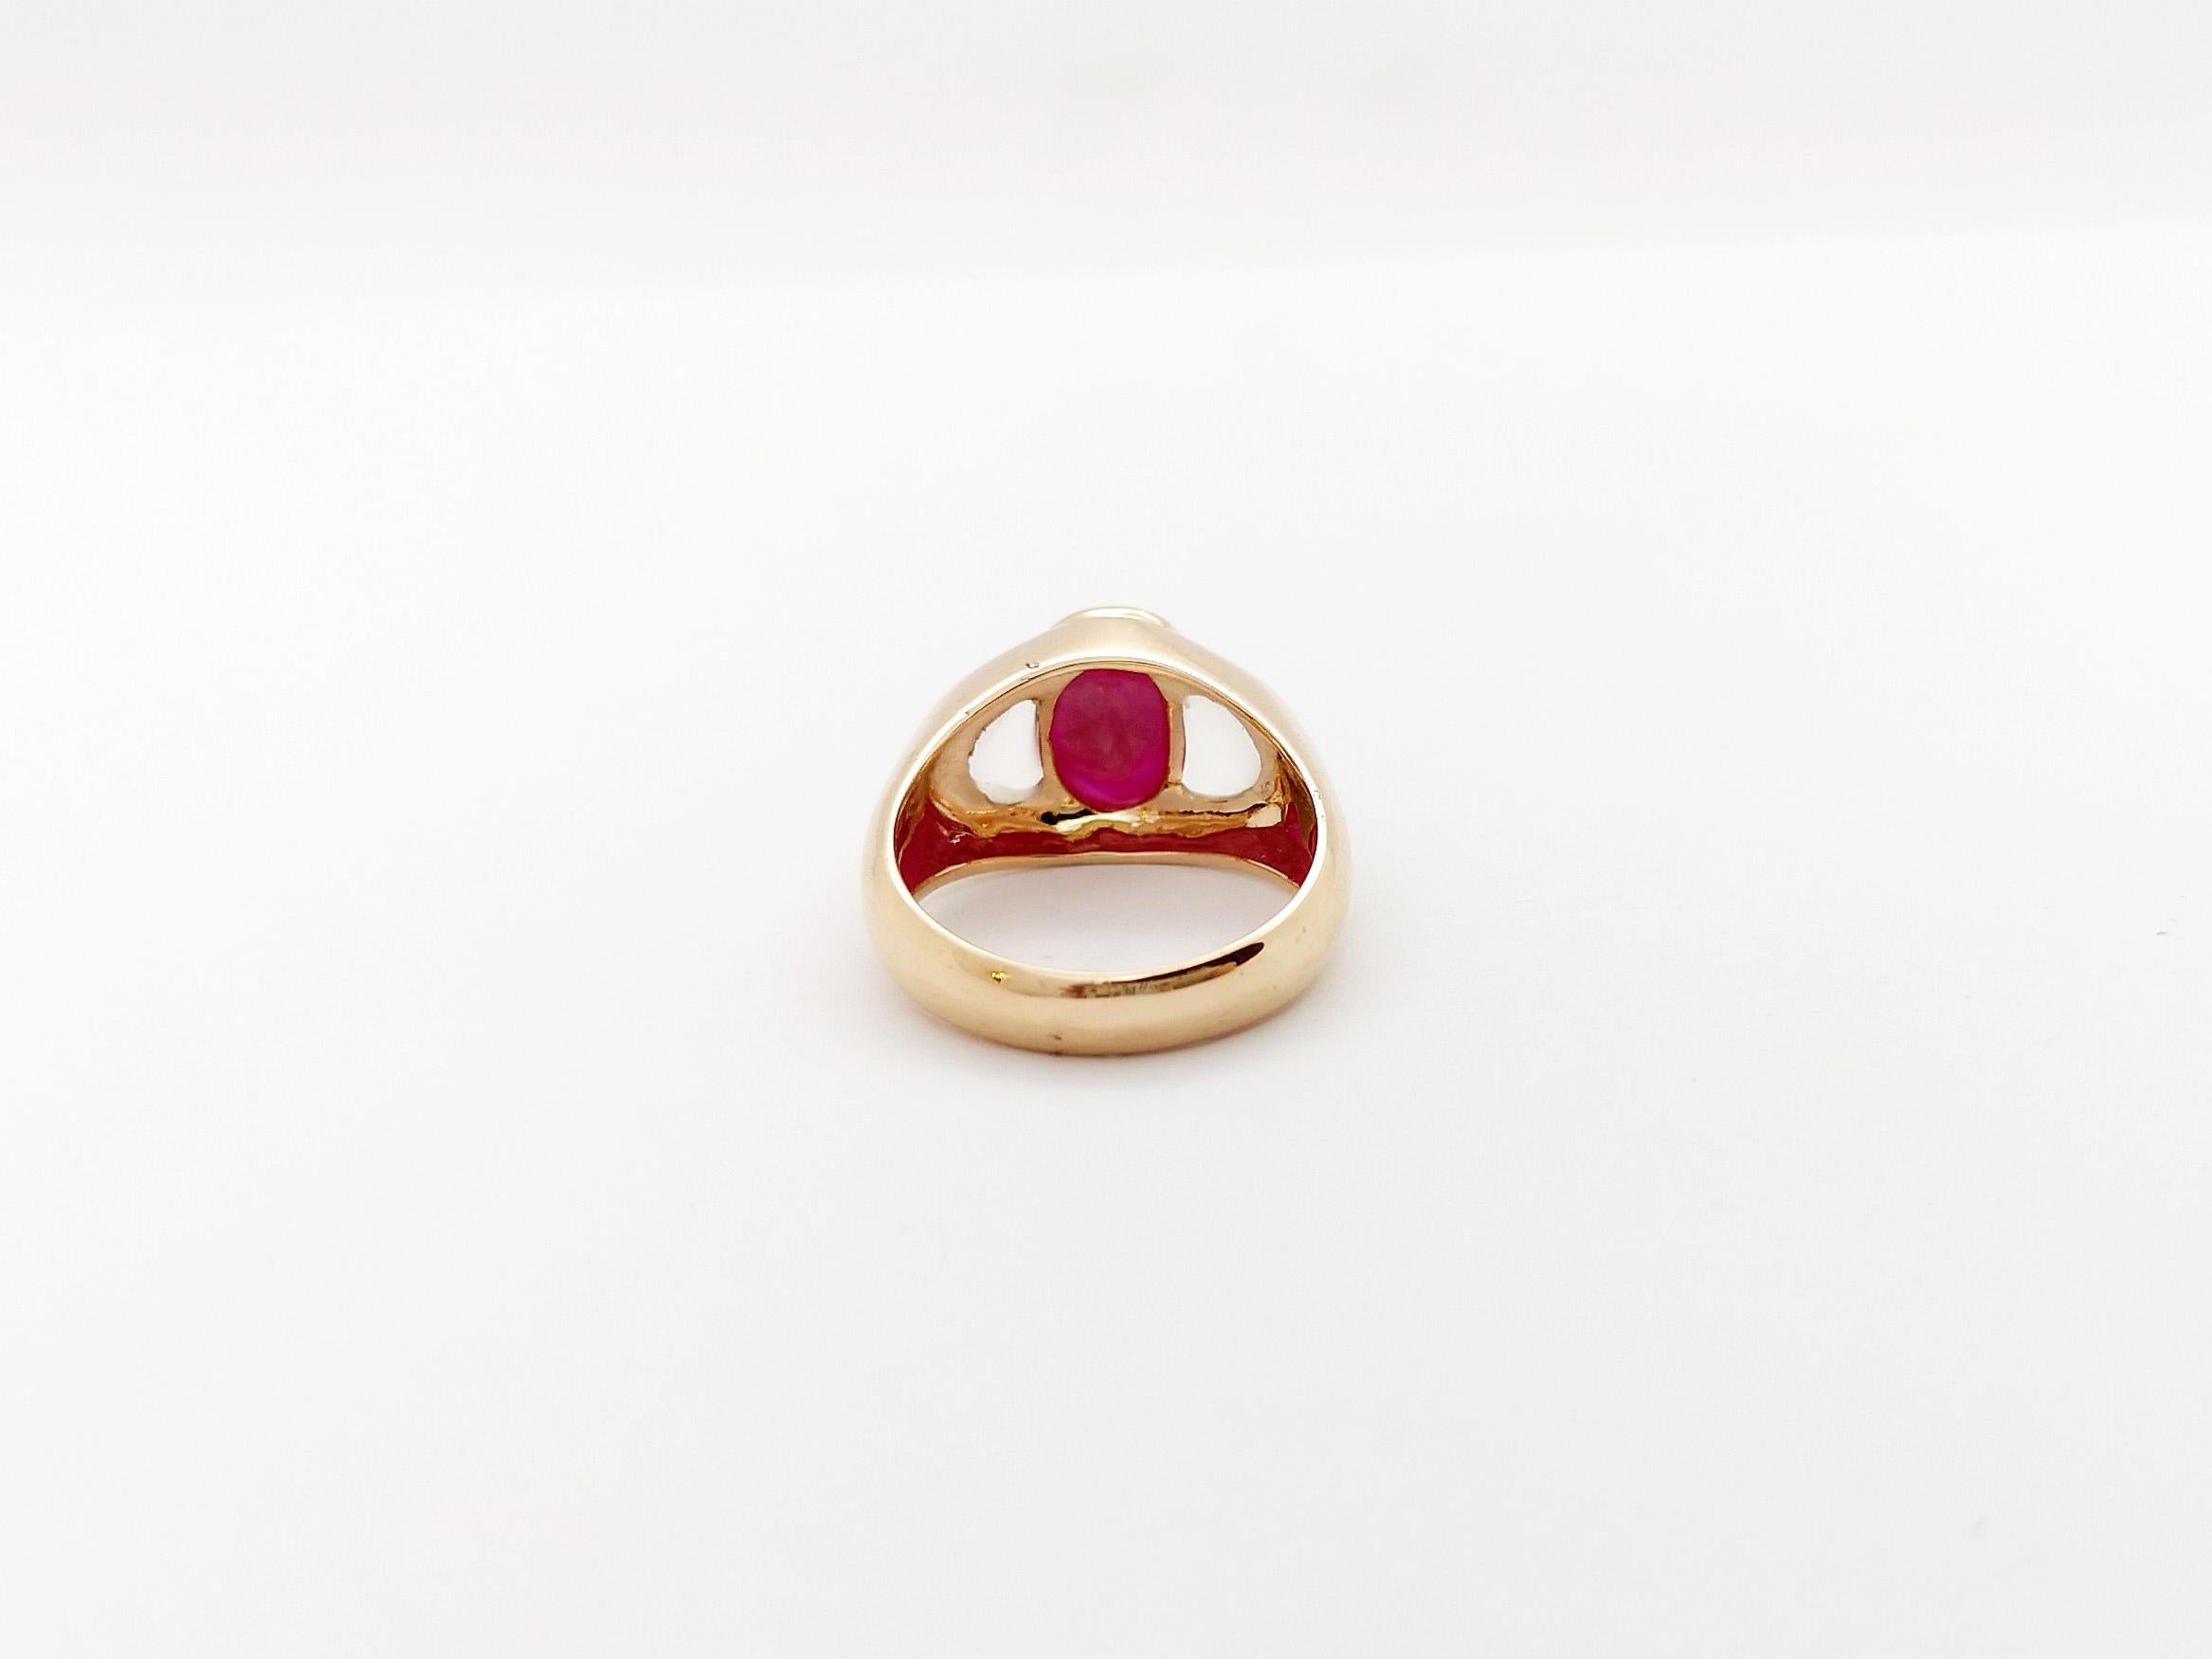 Cabochon Ruby 4.26 carats with Moonstone 1.68 carats Ring set in 18K Rose Gold S For Sale 4